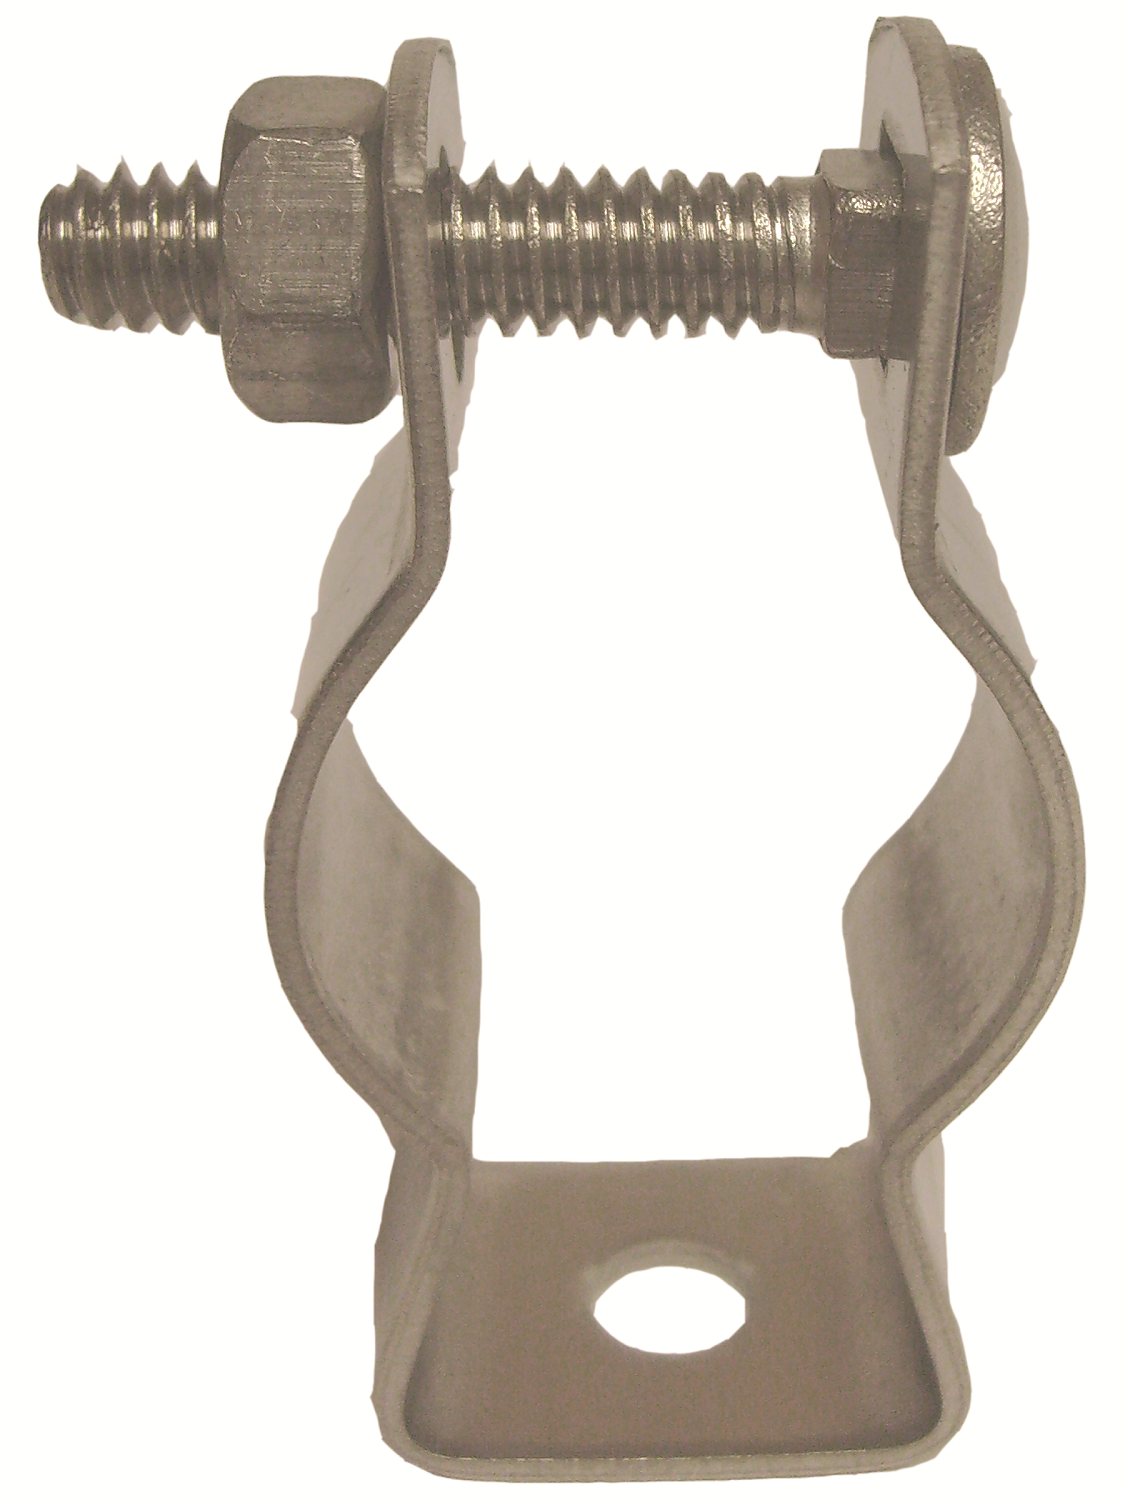 Allied Tube & Conduit HCS25KON Conduit Hanger With Nut and Bolt, 1-1/4 in Conduit, 75 lb Load, Carbon Steel